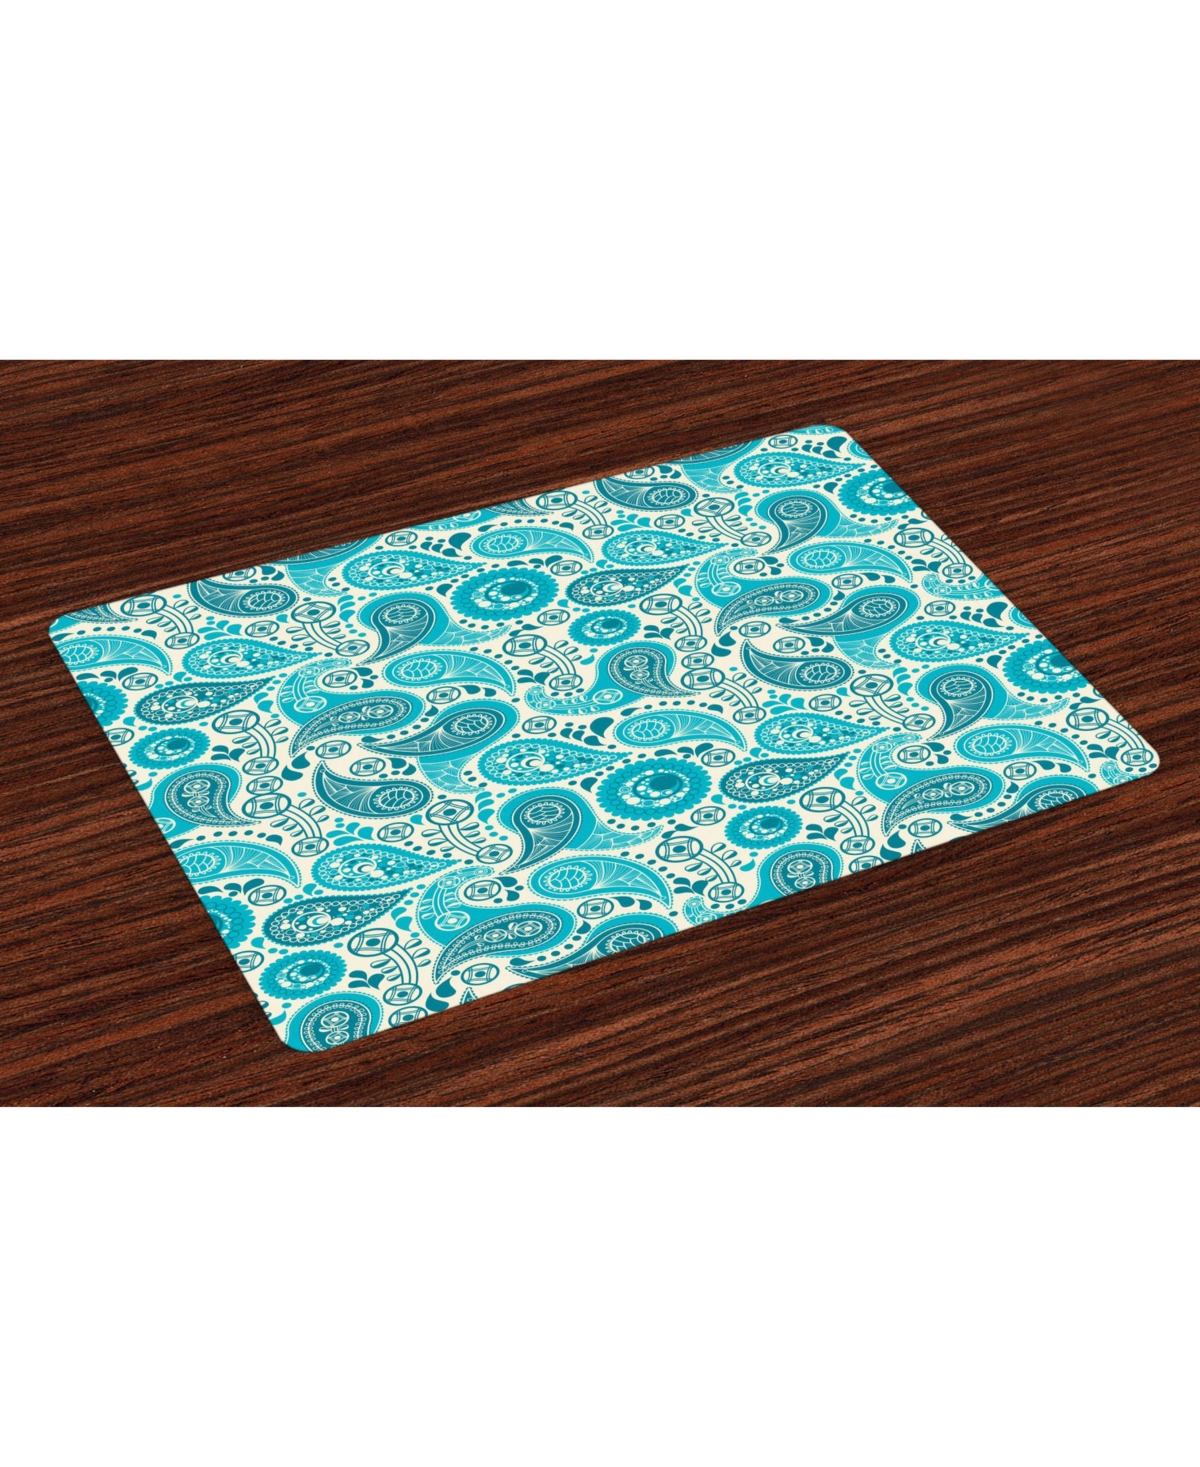 AMBESONNE TURQUOISE PLACE MATS, SET OF 4